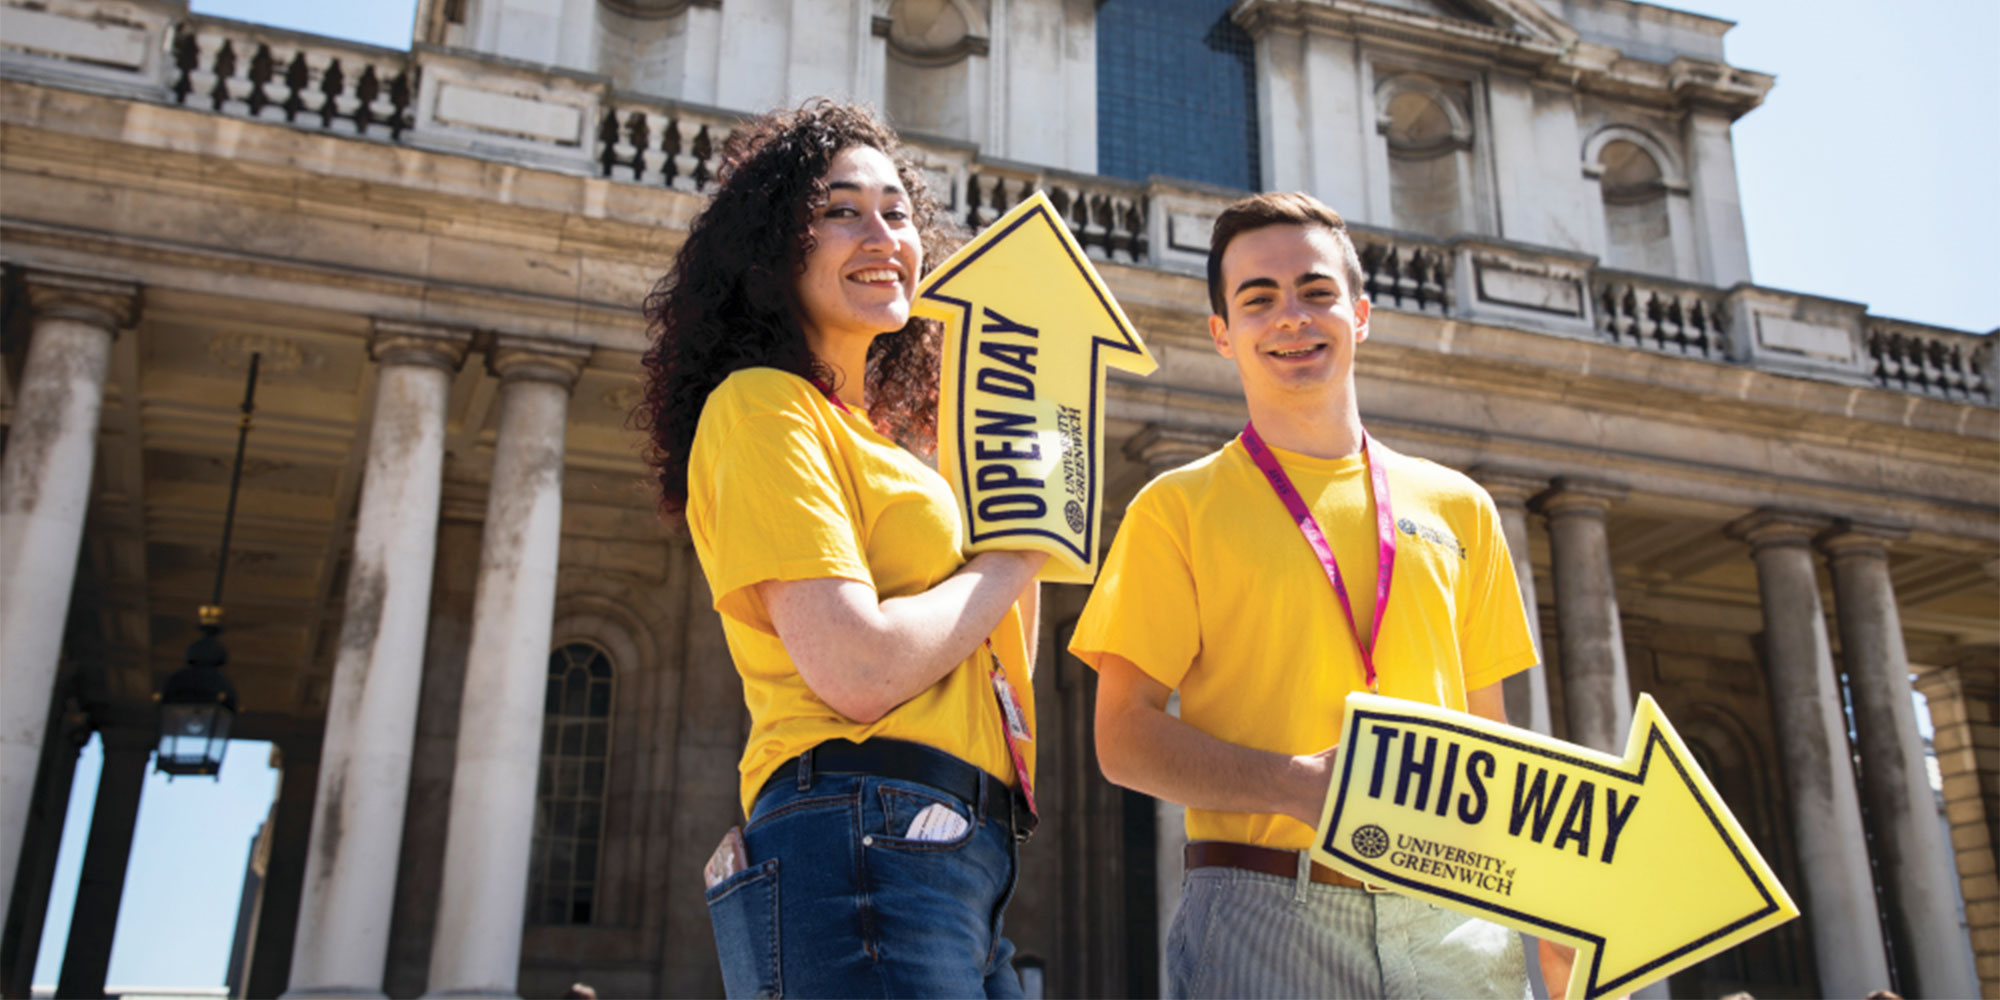 Two student ambassadors standing holding yellow arrow signs in front of the Old Royal Naval College